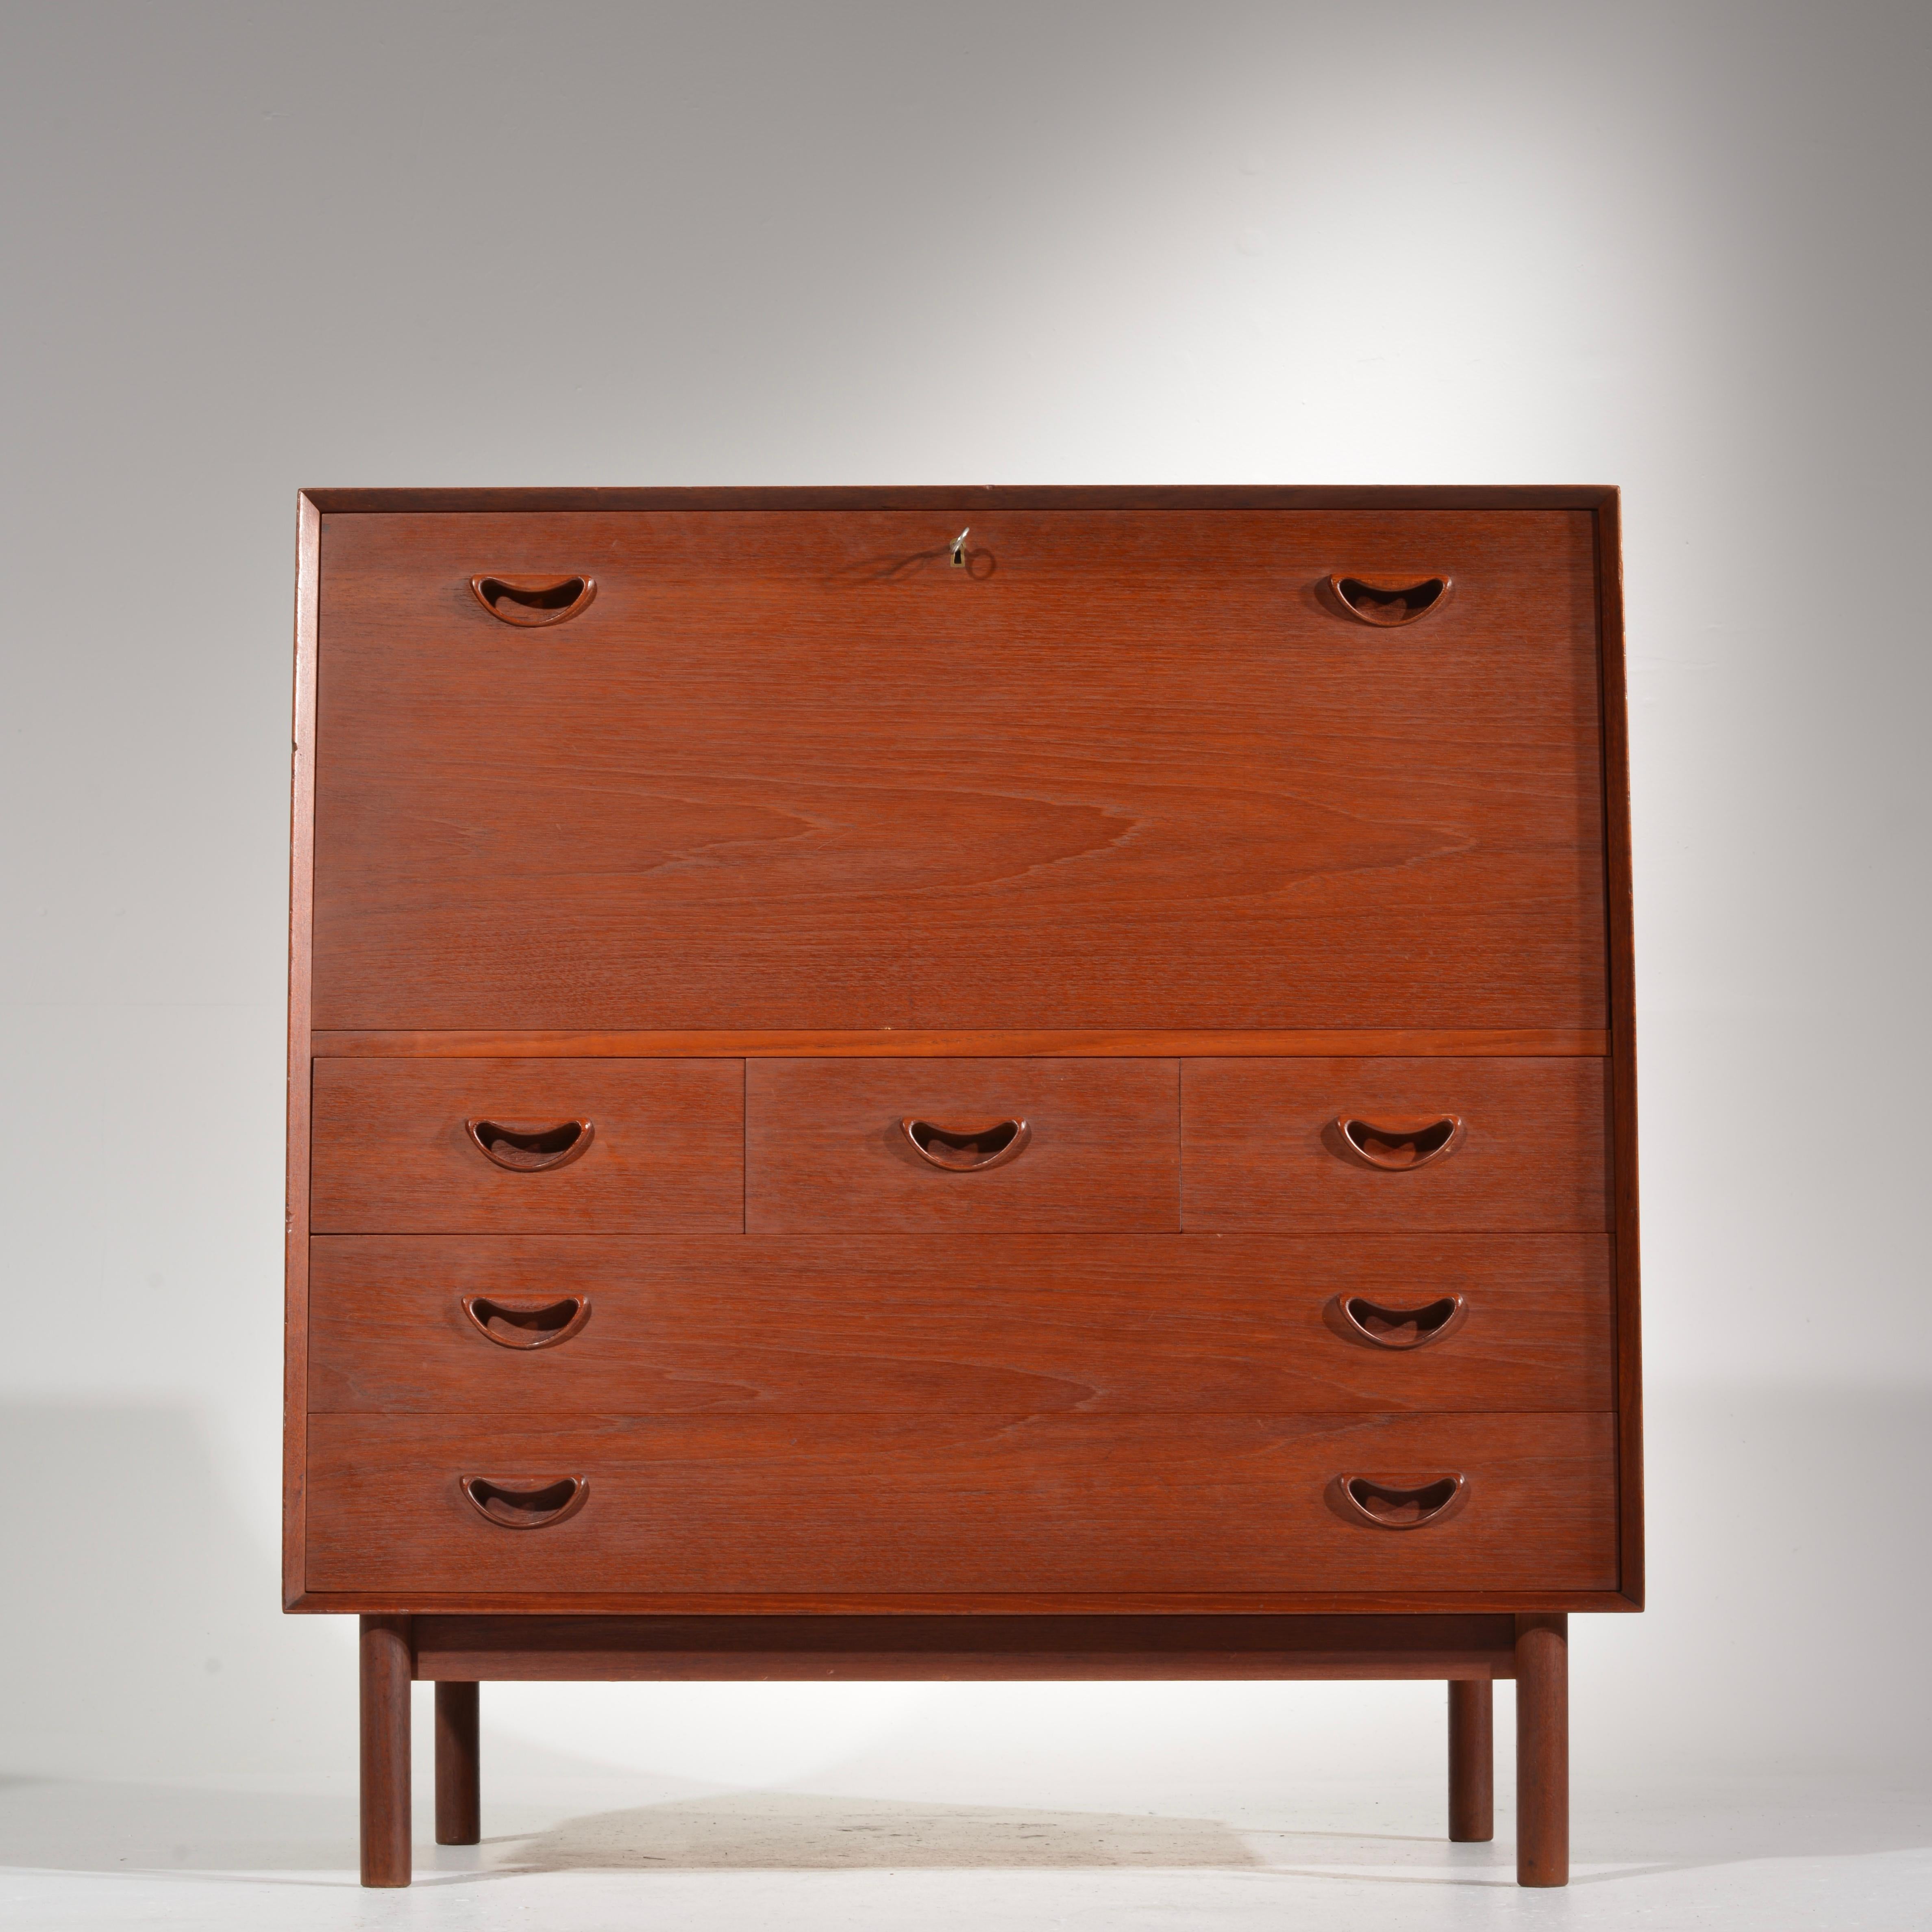 Featuring a drop down desk or bar, three smaller drawers over two large drawers. Distinctive finger jointing on top and sides. Excellent traditional oiled finish patina and rich vintage color. Imported from Denmark by John Stuart.